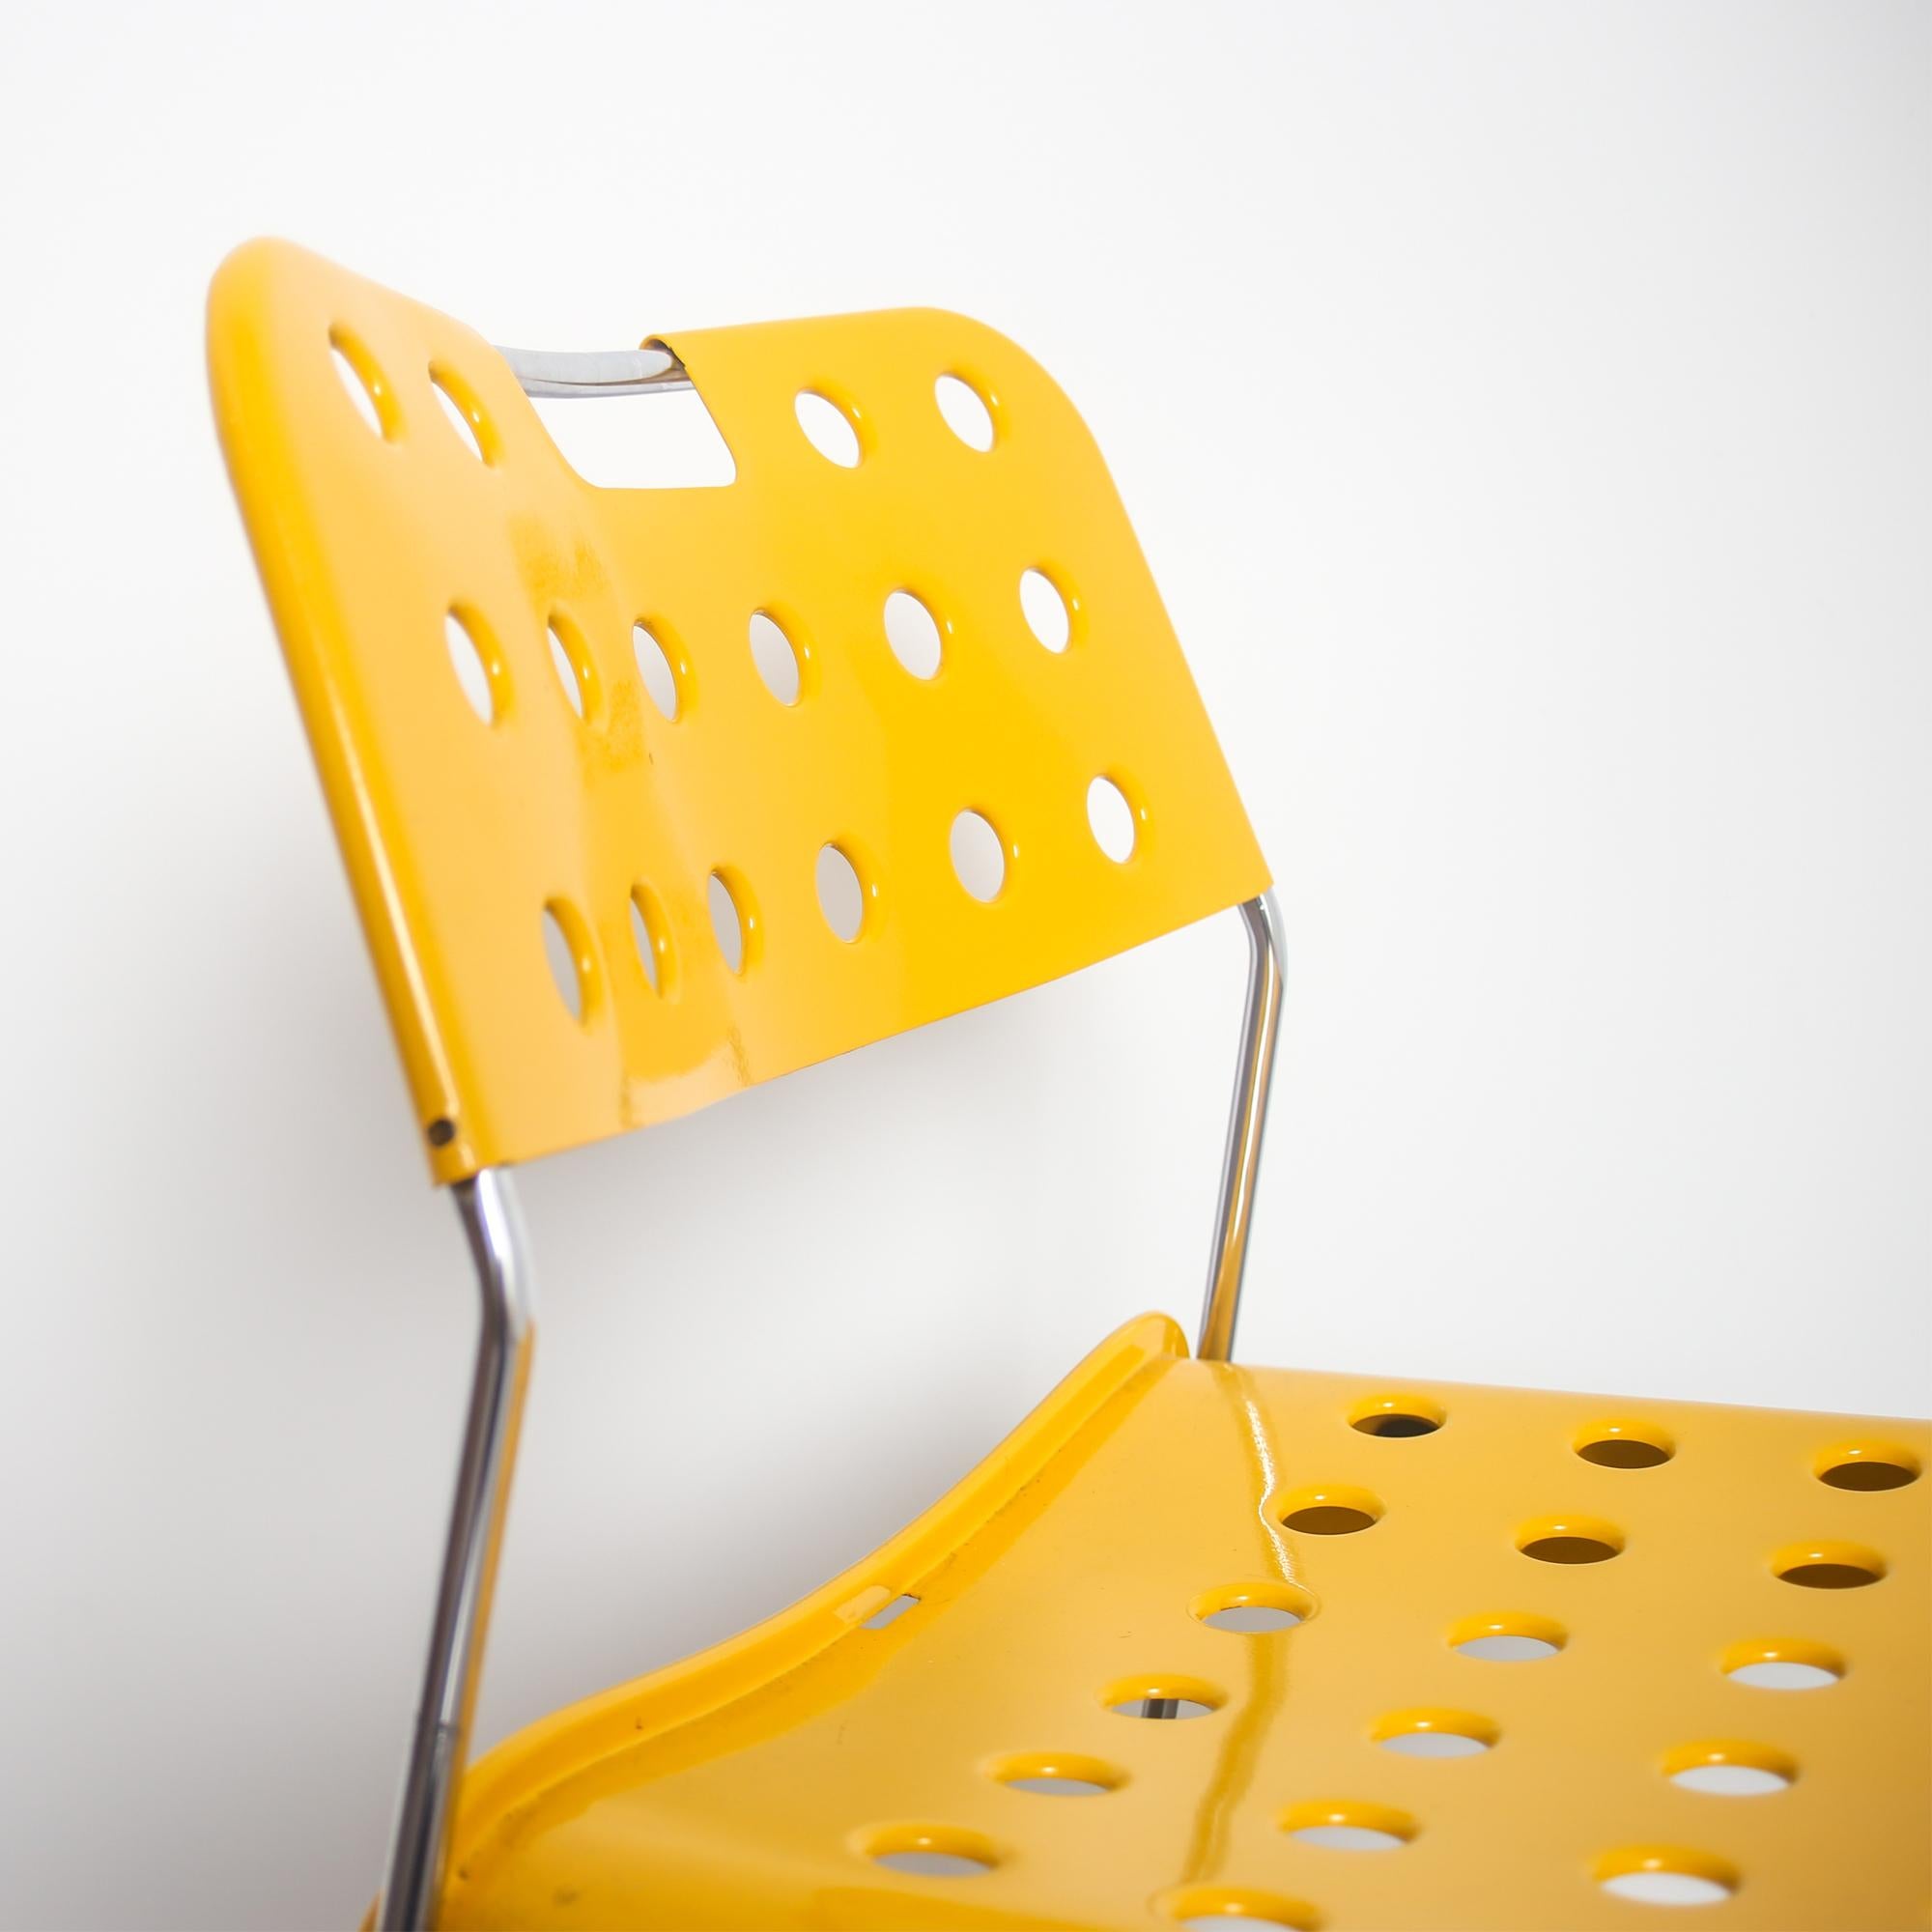 This yellow 'Omstak' model chair was designed by Rodney Kinsman, and manufactured in Italy by Bieffeplast in 1972. It is made from iron and steel, and features a yellow lacquered metal seat and backrest with perforated details. This item is in a